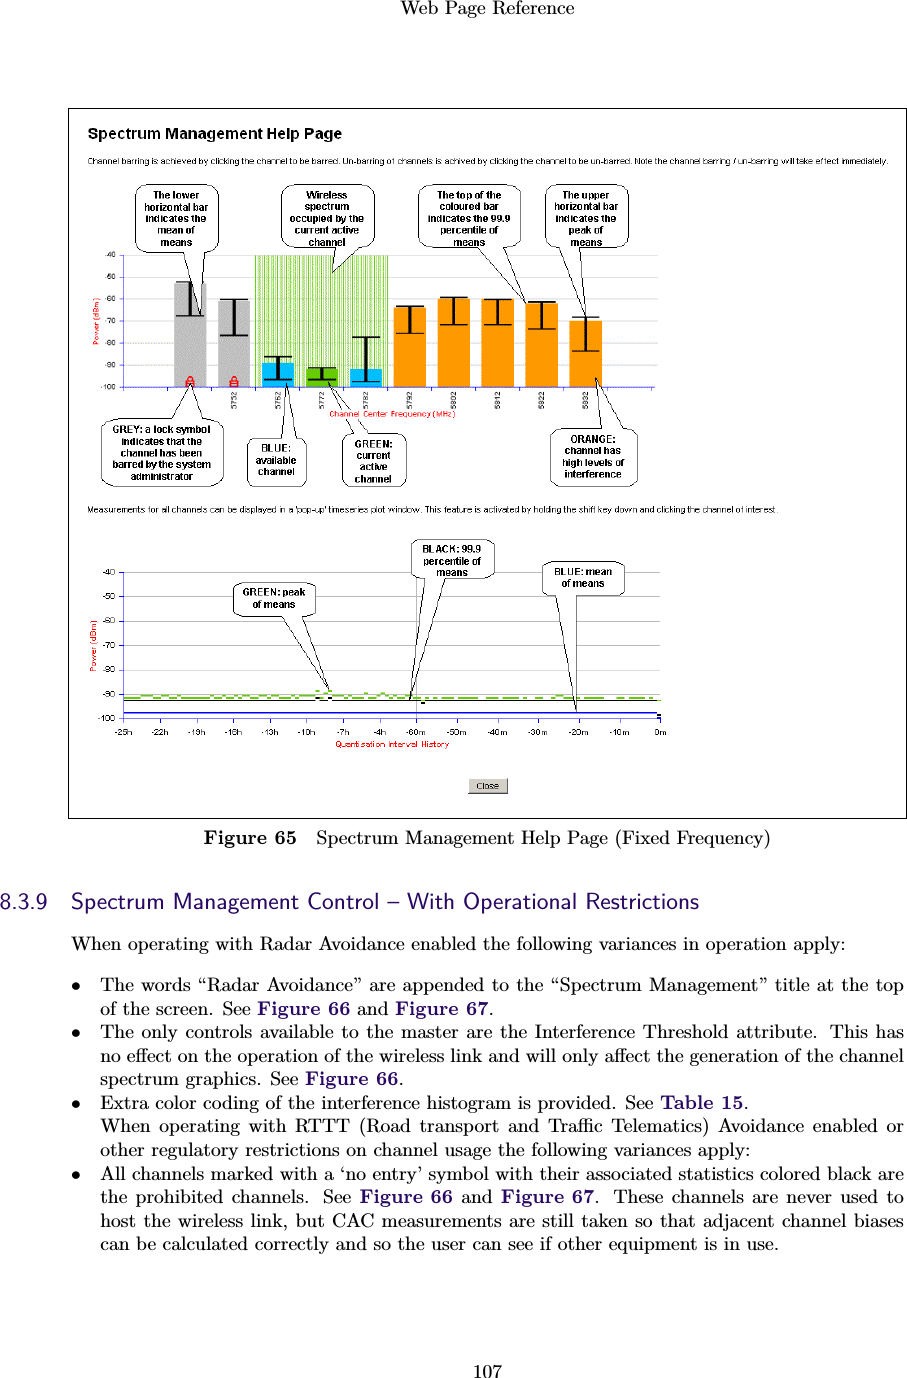 Web Page Reference107Figure 65 Spectrum Management Help Page (Fixed Frequency)8.3.9 Spectrum Management Control – With Operational RestrictionsWhen operating with Radar Avoidance enabled the following variances in operation apply:•The words “Radar Avoidance” are appended to the “Spectrum Management” title at the topof the screen. See Figure 66 and Figure 67.•The only controls available to the master are the Interference Threshold attribute. This hasno eﬀect on the operation of the wireless link and will only aﬀect the generation of the channelspectrum graphics. See Figure 66.•Extra color coding of the interference histogram is provided. See Table 15.When operating with RTTT (Road transport and Traﬃc Telematics) Avoidance enabled orother regulatory restrictions on channel usage the following variances apply:•All channels marked with a ‘no entry’ symbol with their associated statistics colored black arethe prohibited channels. See Figure 66 and Figure 67. These channels are never used tohost the wireless link, but CAC measurements are still taken so that adjacent channel biasescan be calculated correctly and so the user can see if other equipment is in use.